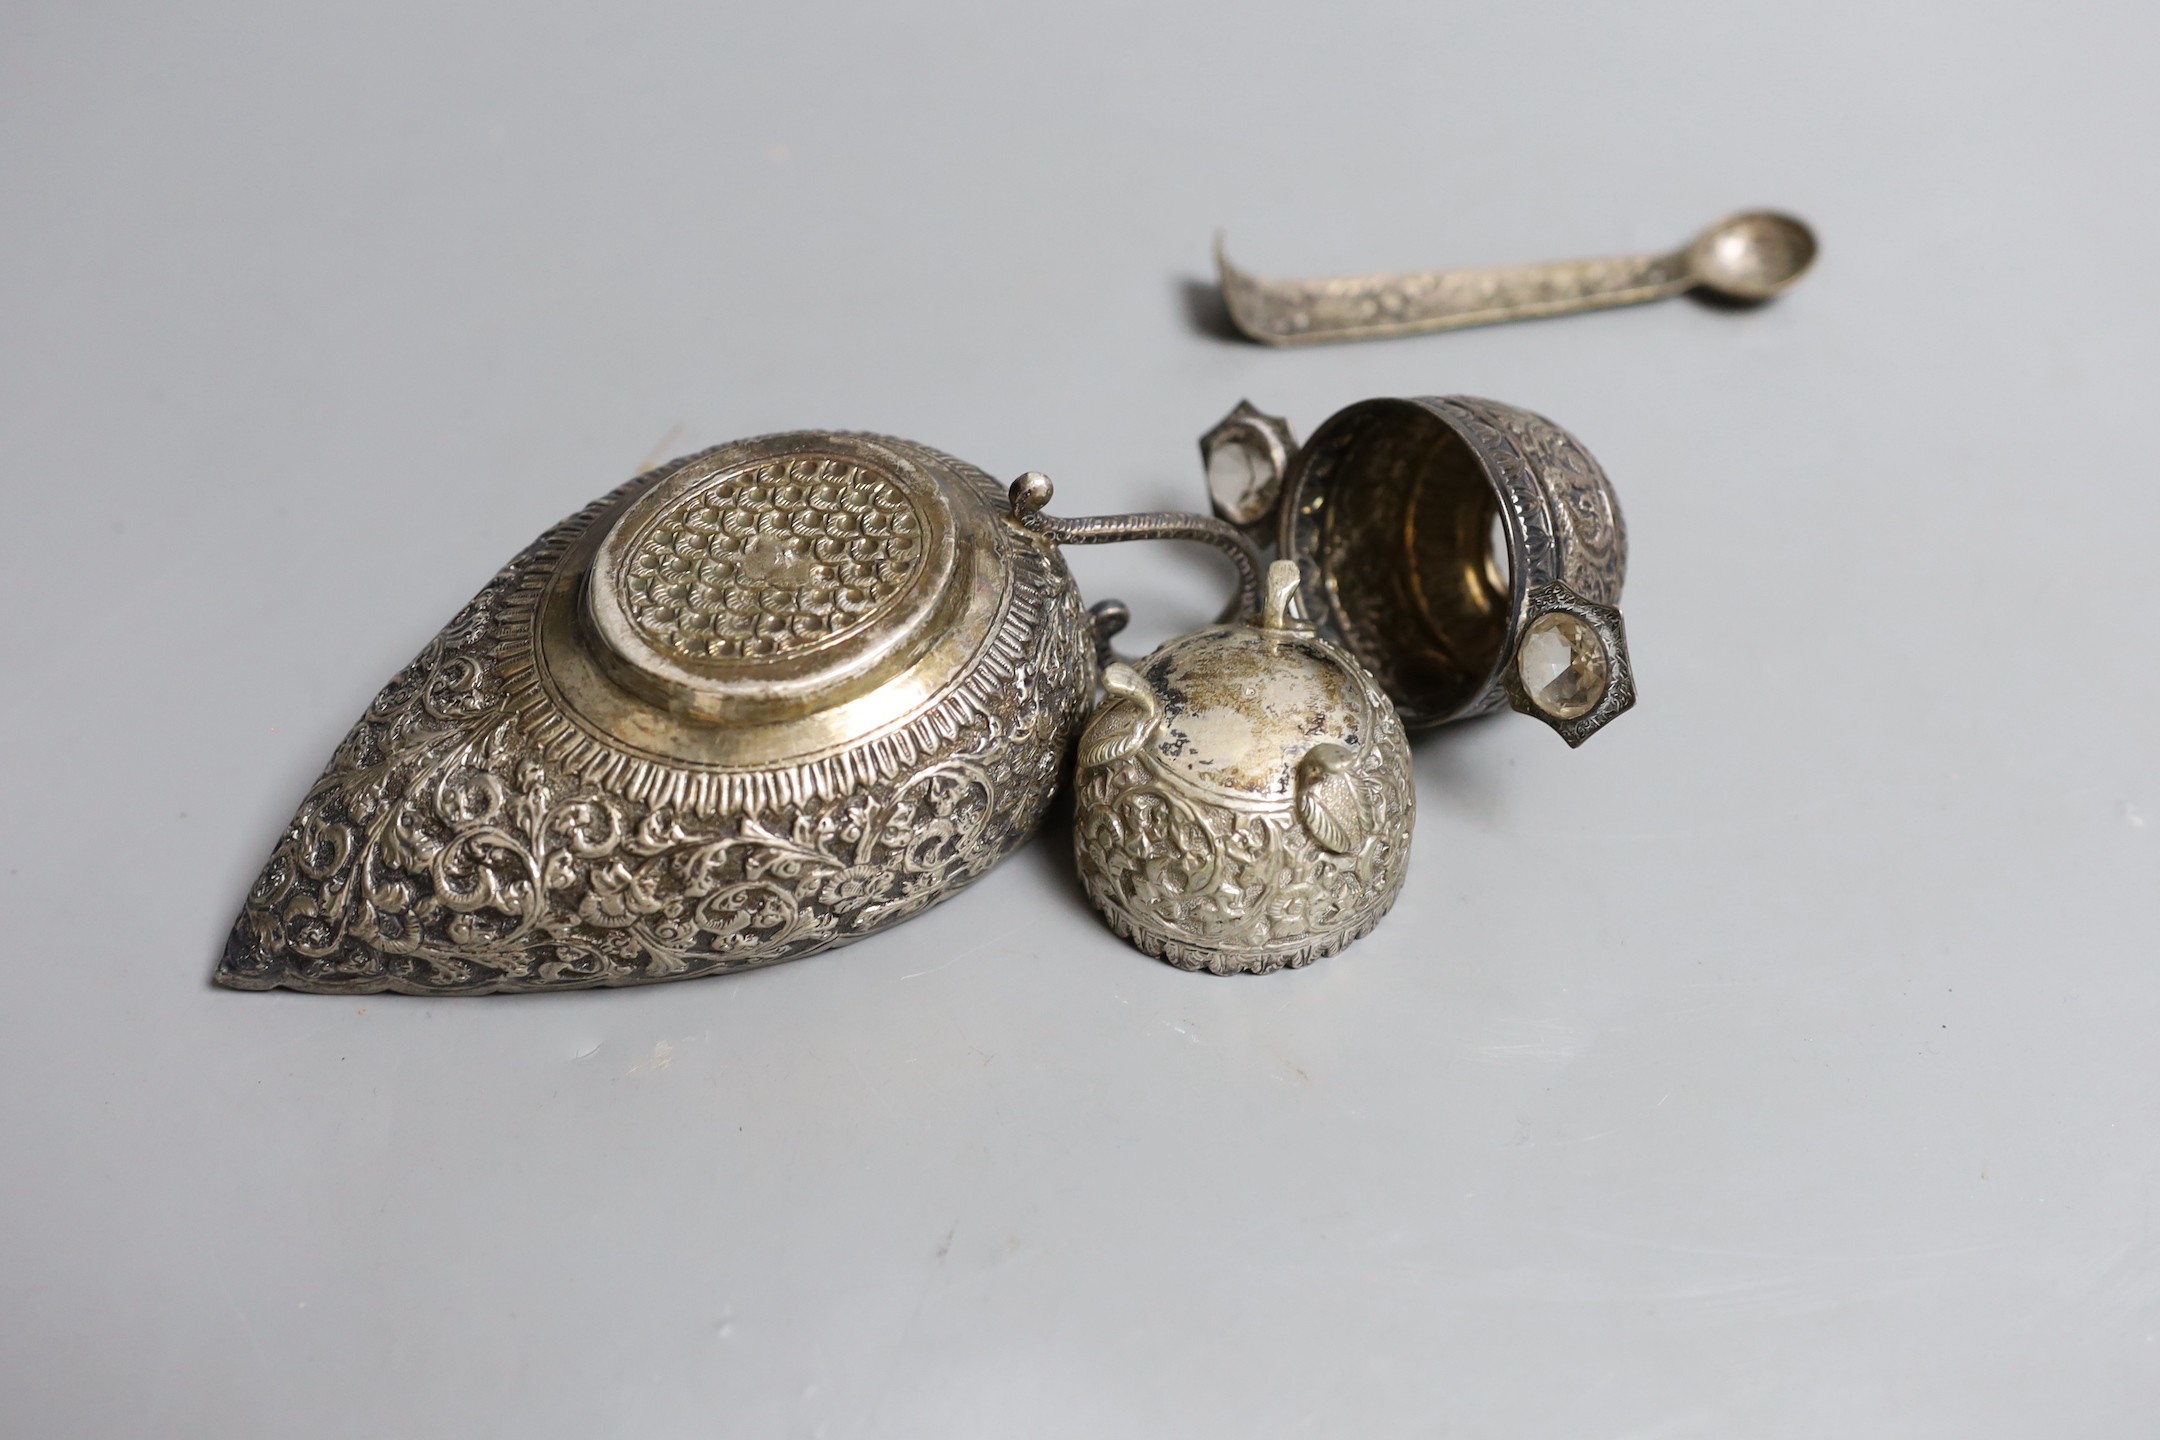 An Indian white metal gem set tasting cup, diameter 87mm, a sauce boat, salt and part of a pair of tongs (a.f.).